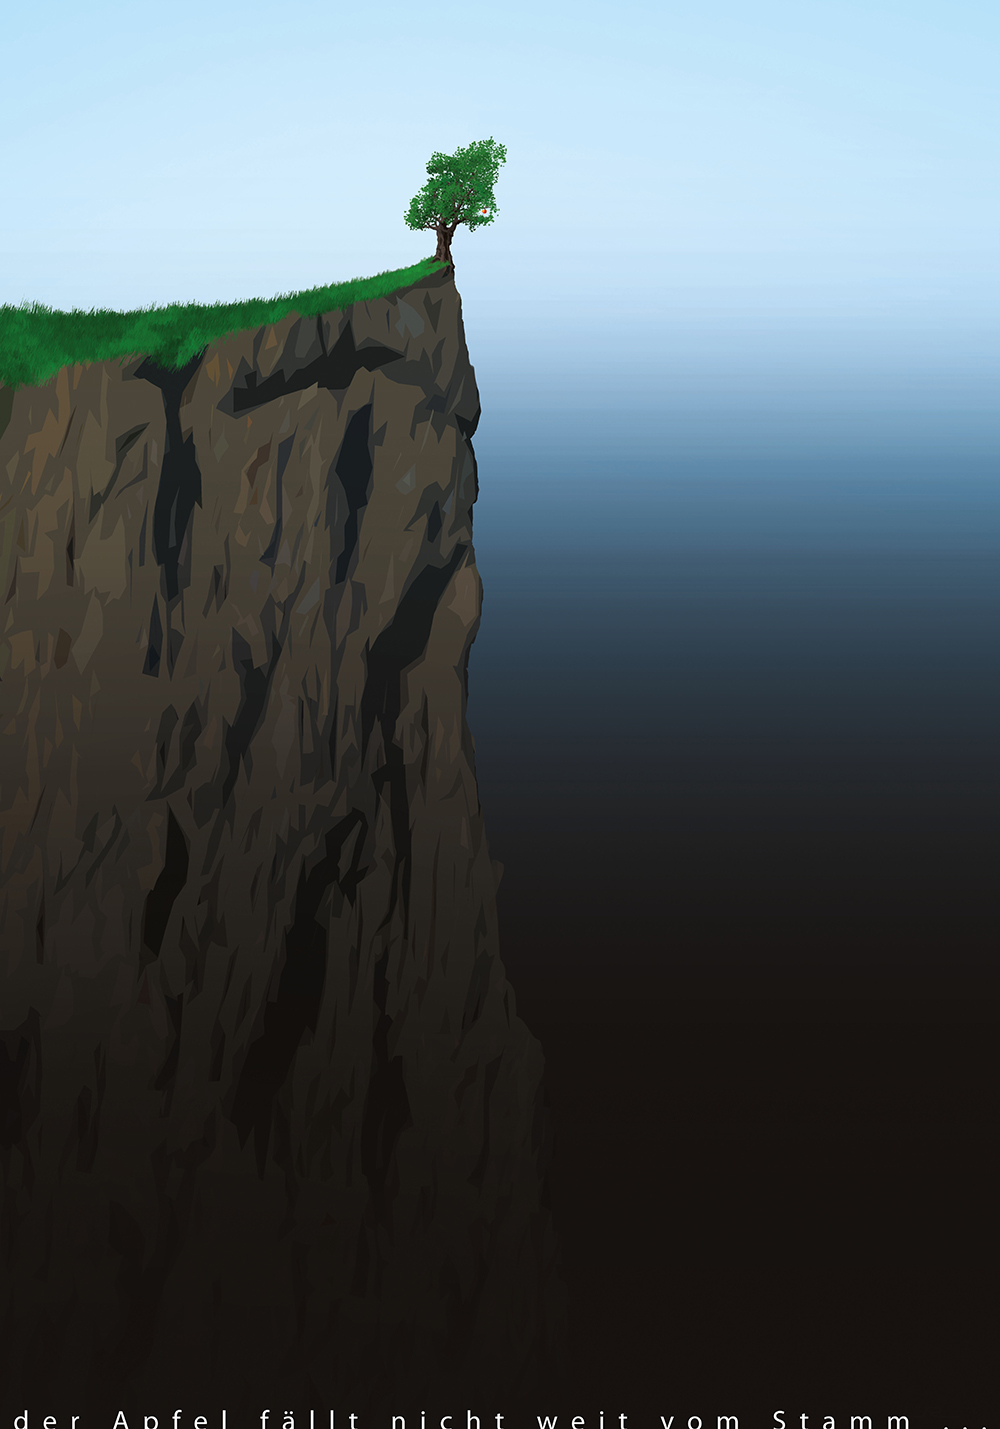 A poster saying "the apple does not fall far from the tree" – showing an apple tree at the edge of a steep cliff